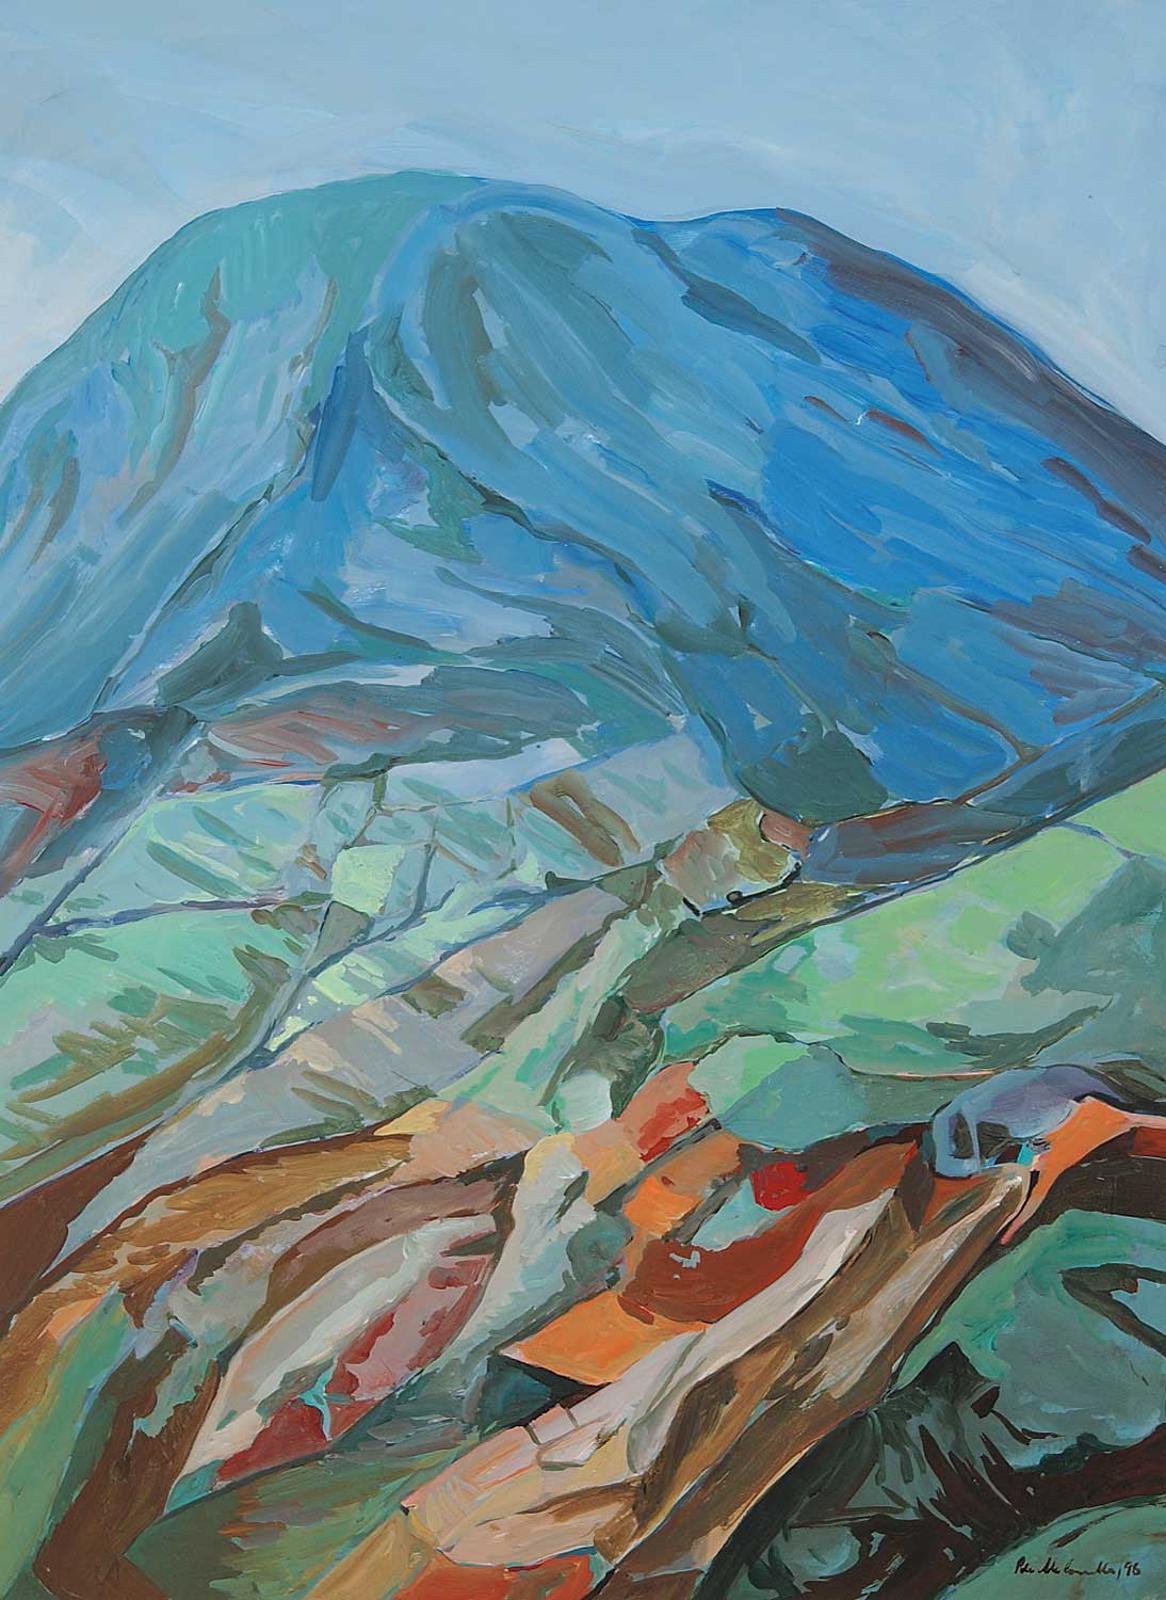 Peter McConville (1951) - Untitled - The Blue Mountains